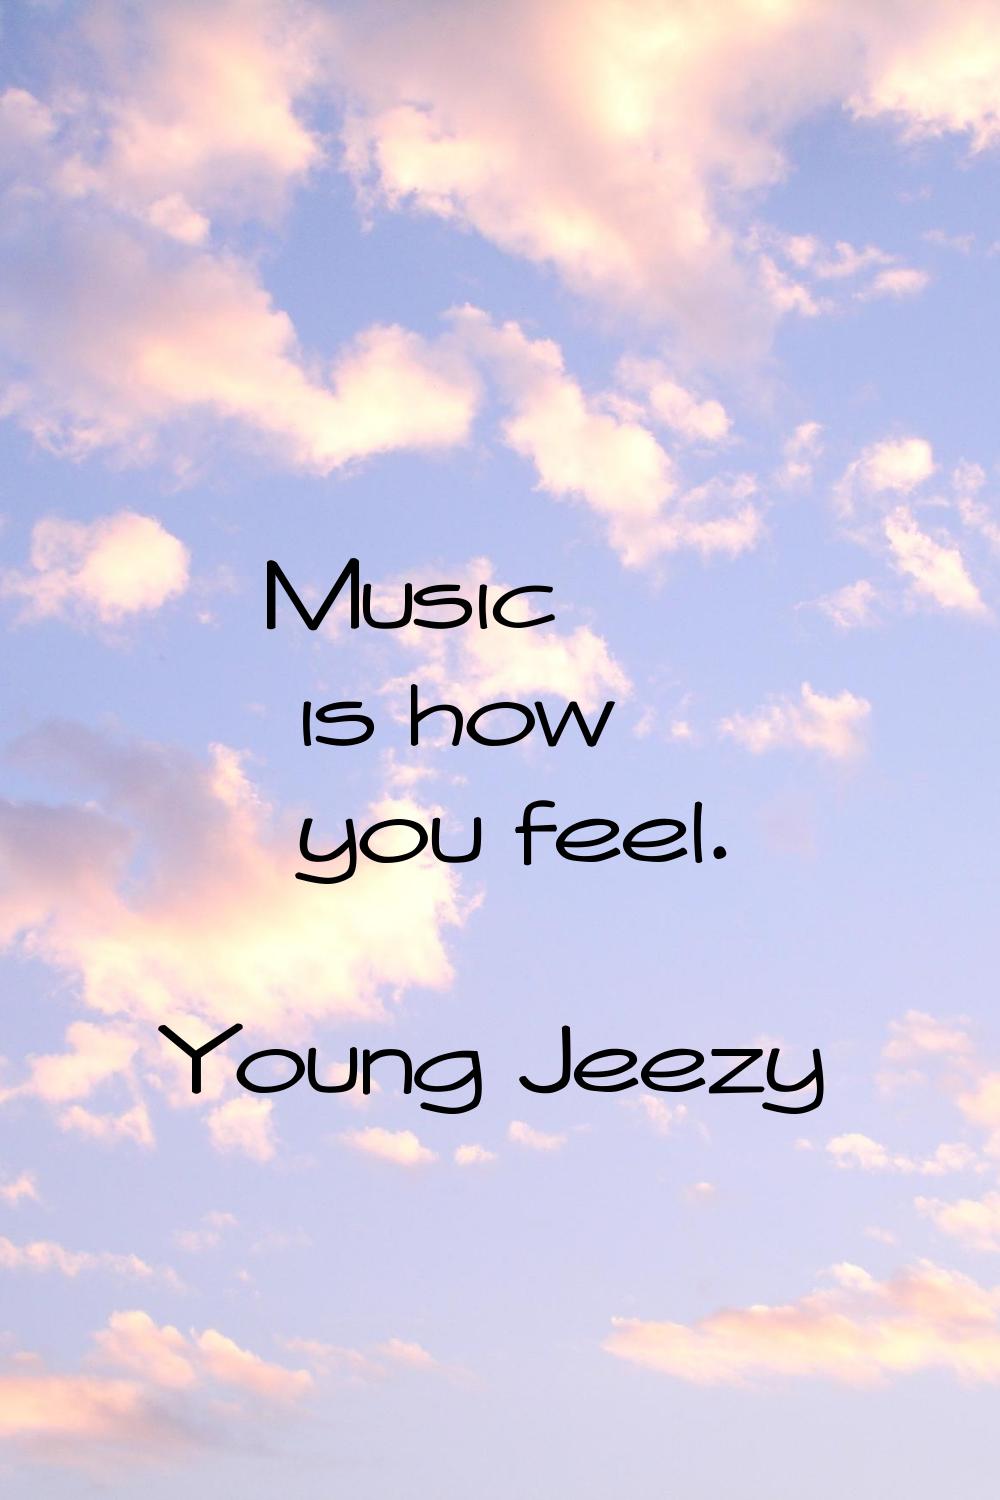 Music is how you feel.